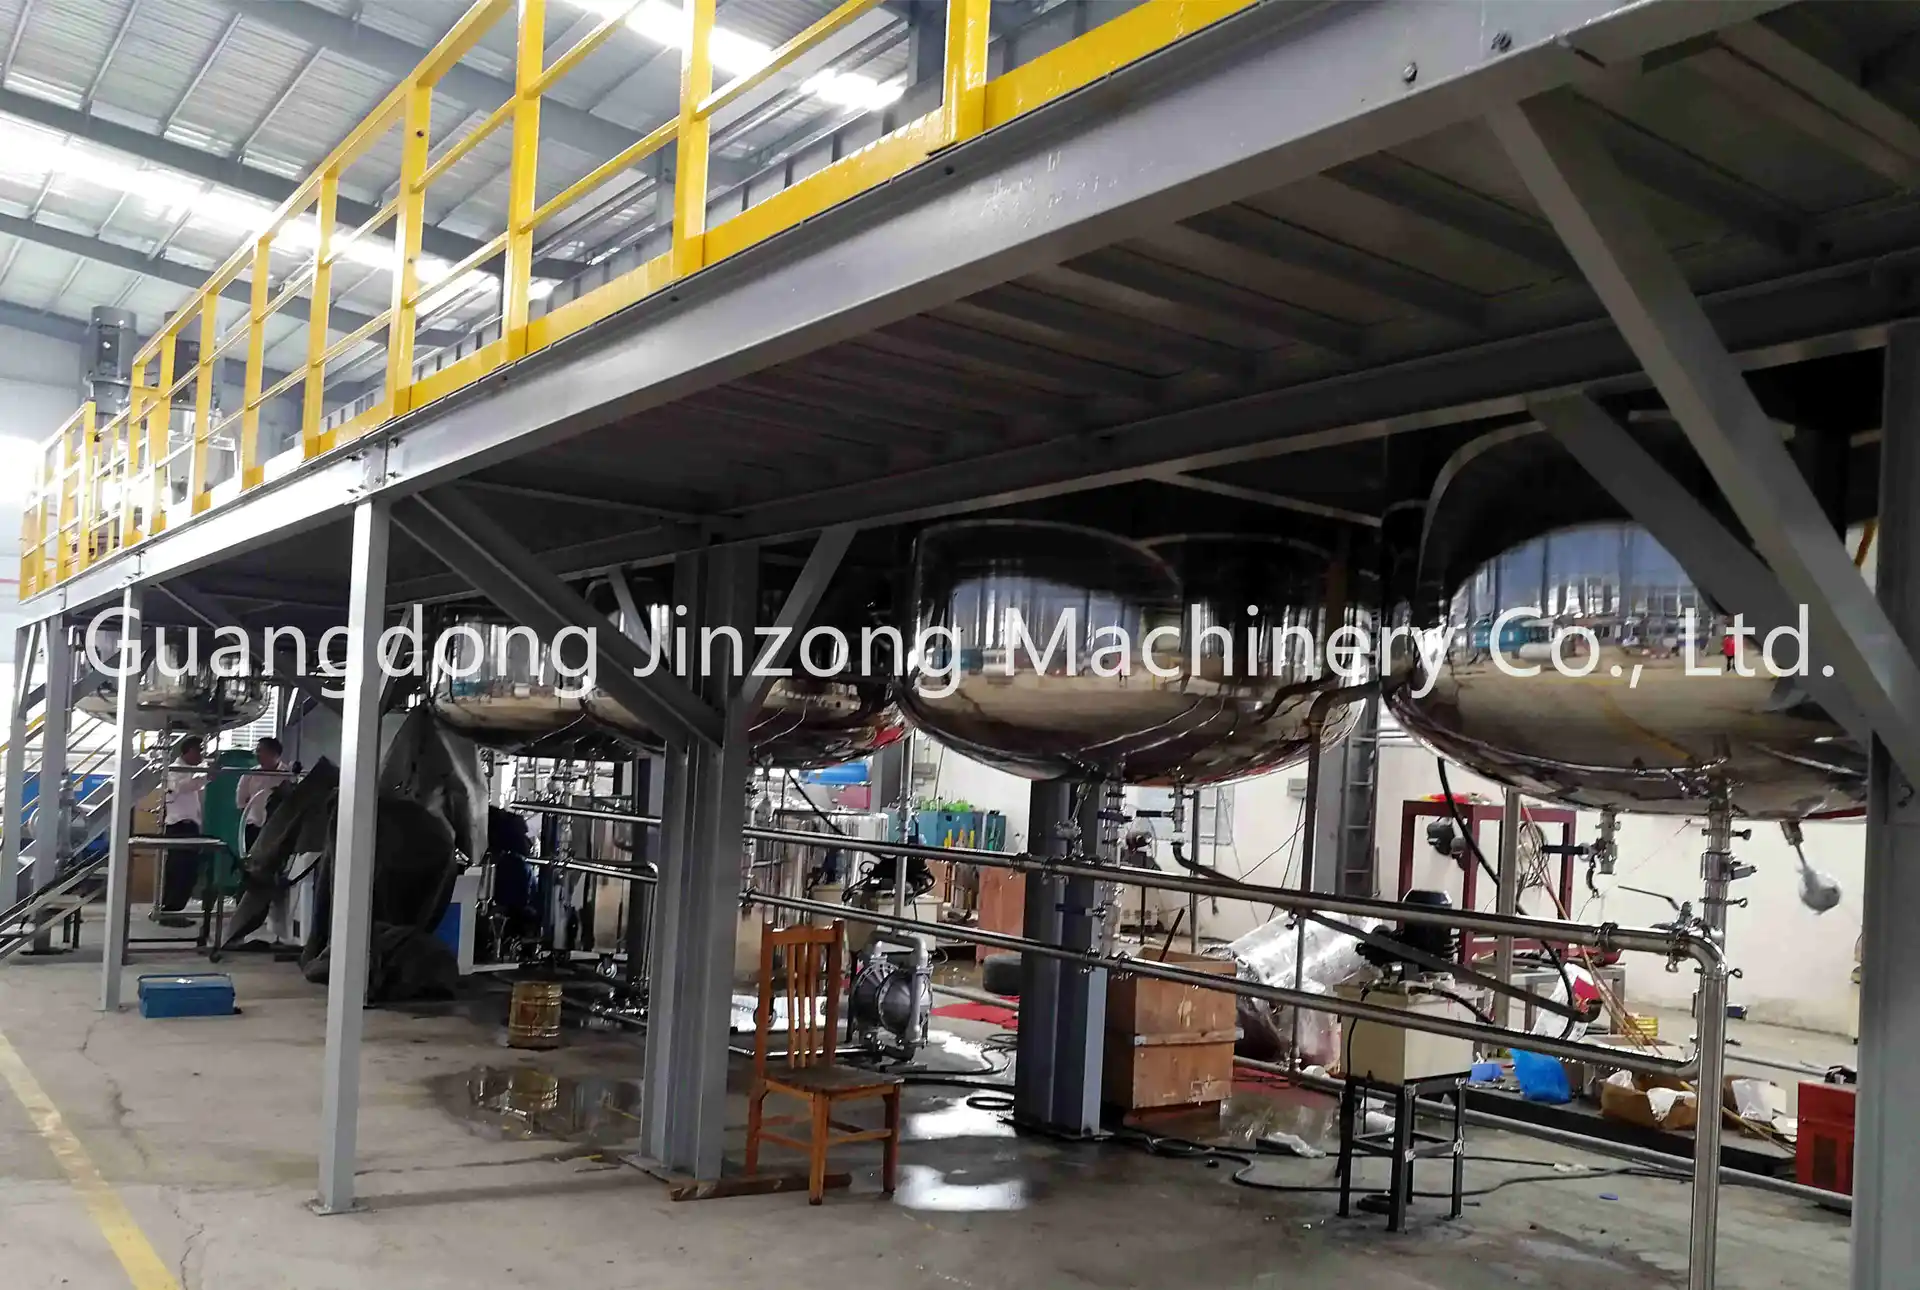 Interior-Exterior Wall Paint Production Line